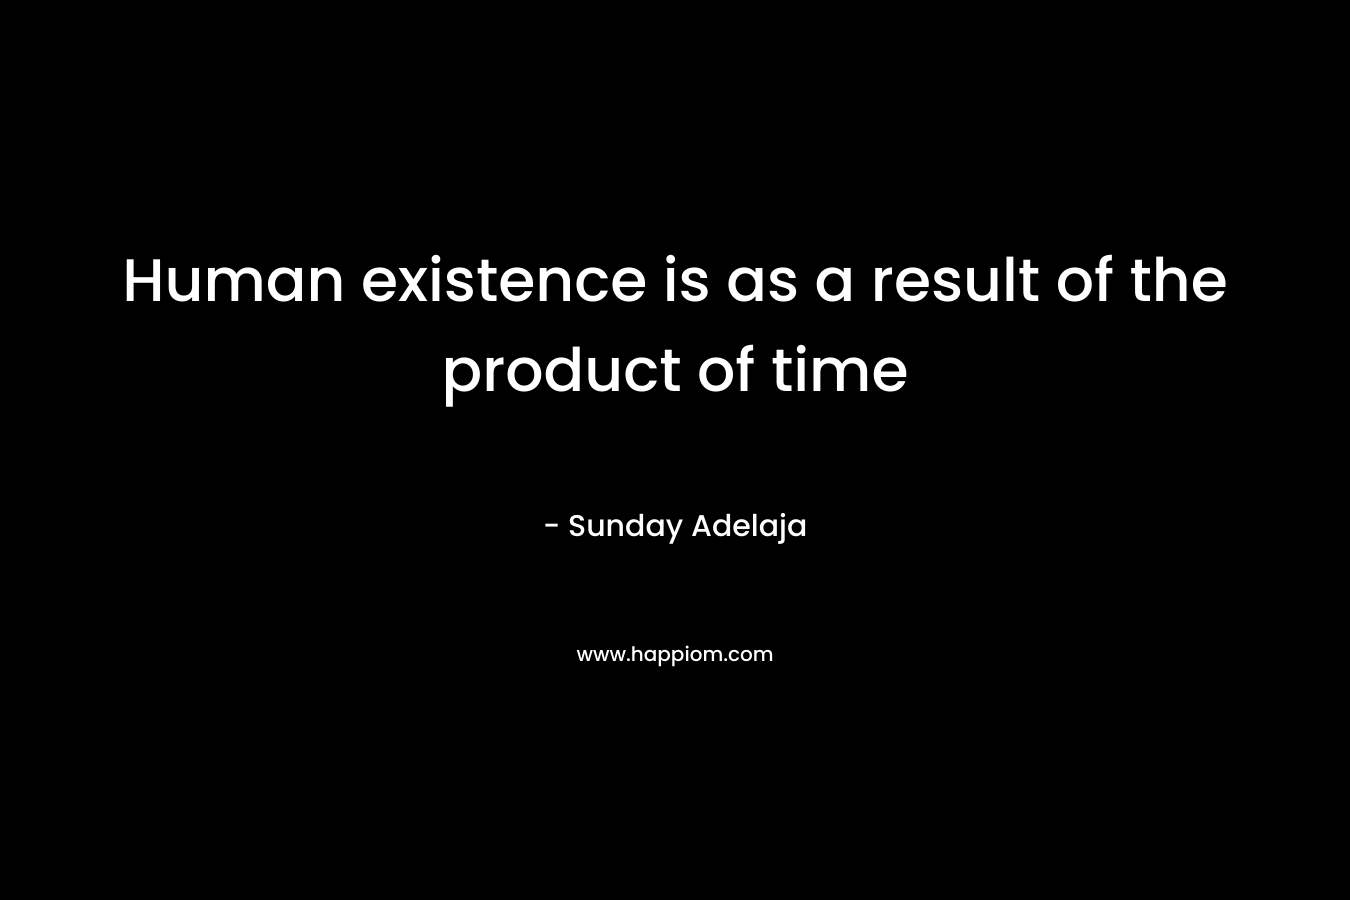 Human existence is as a result of the product of time